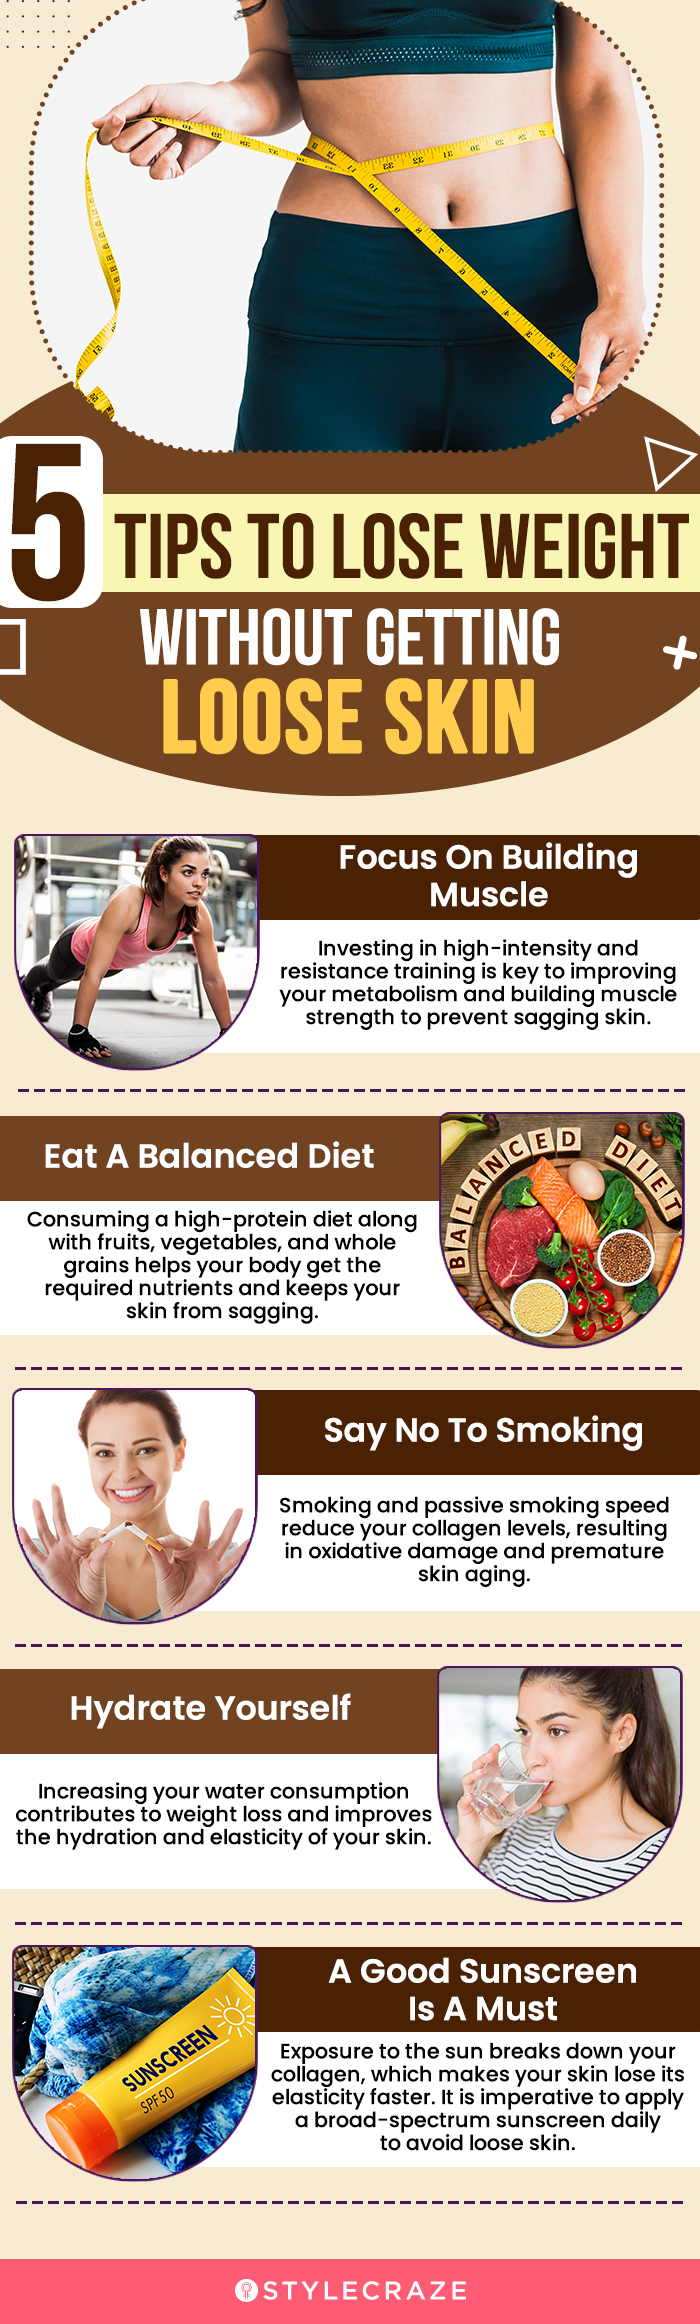 5 tips to lose weight without getting loose skin (infographic)